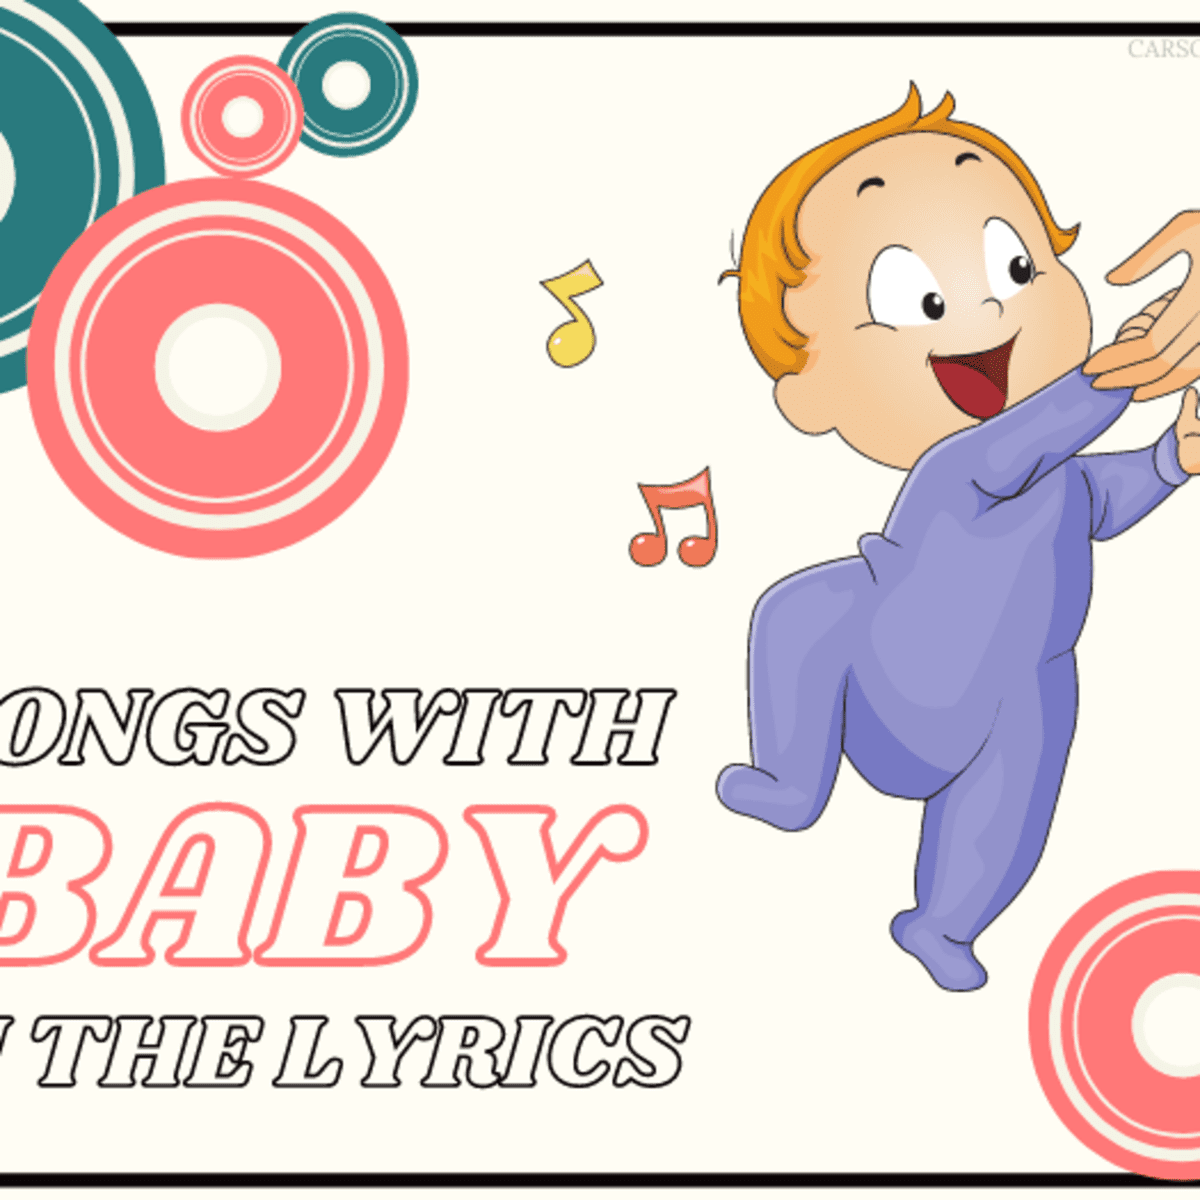 Best Songs With Baby In The Lyrics Spinditty